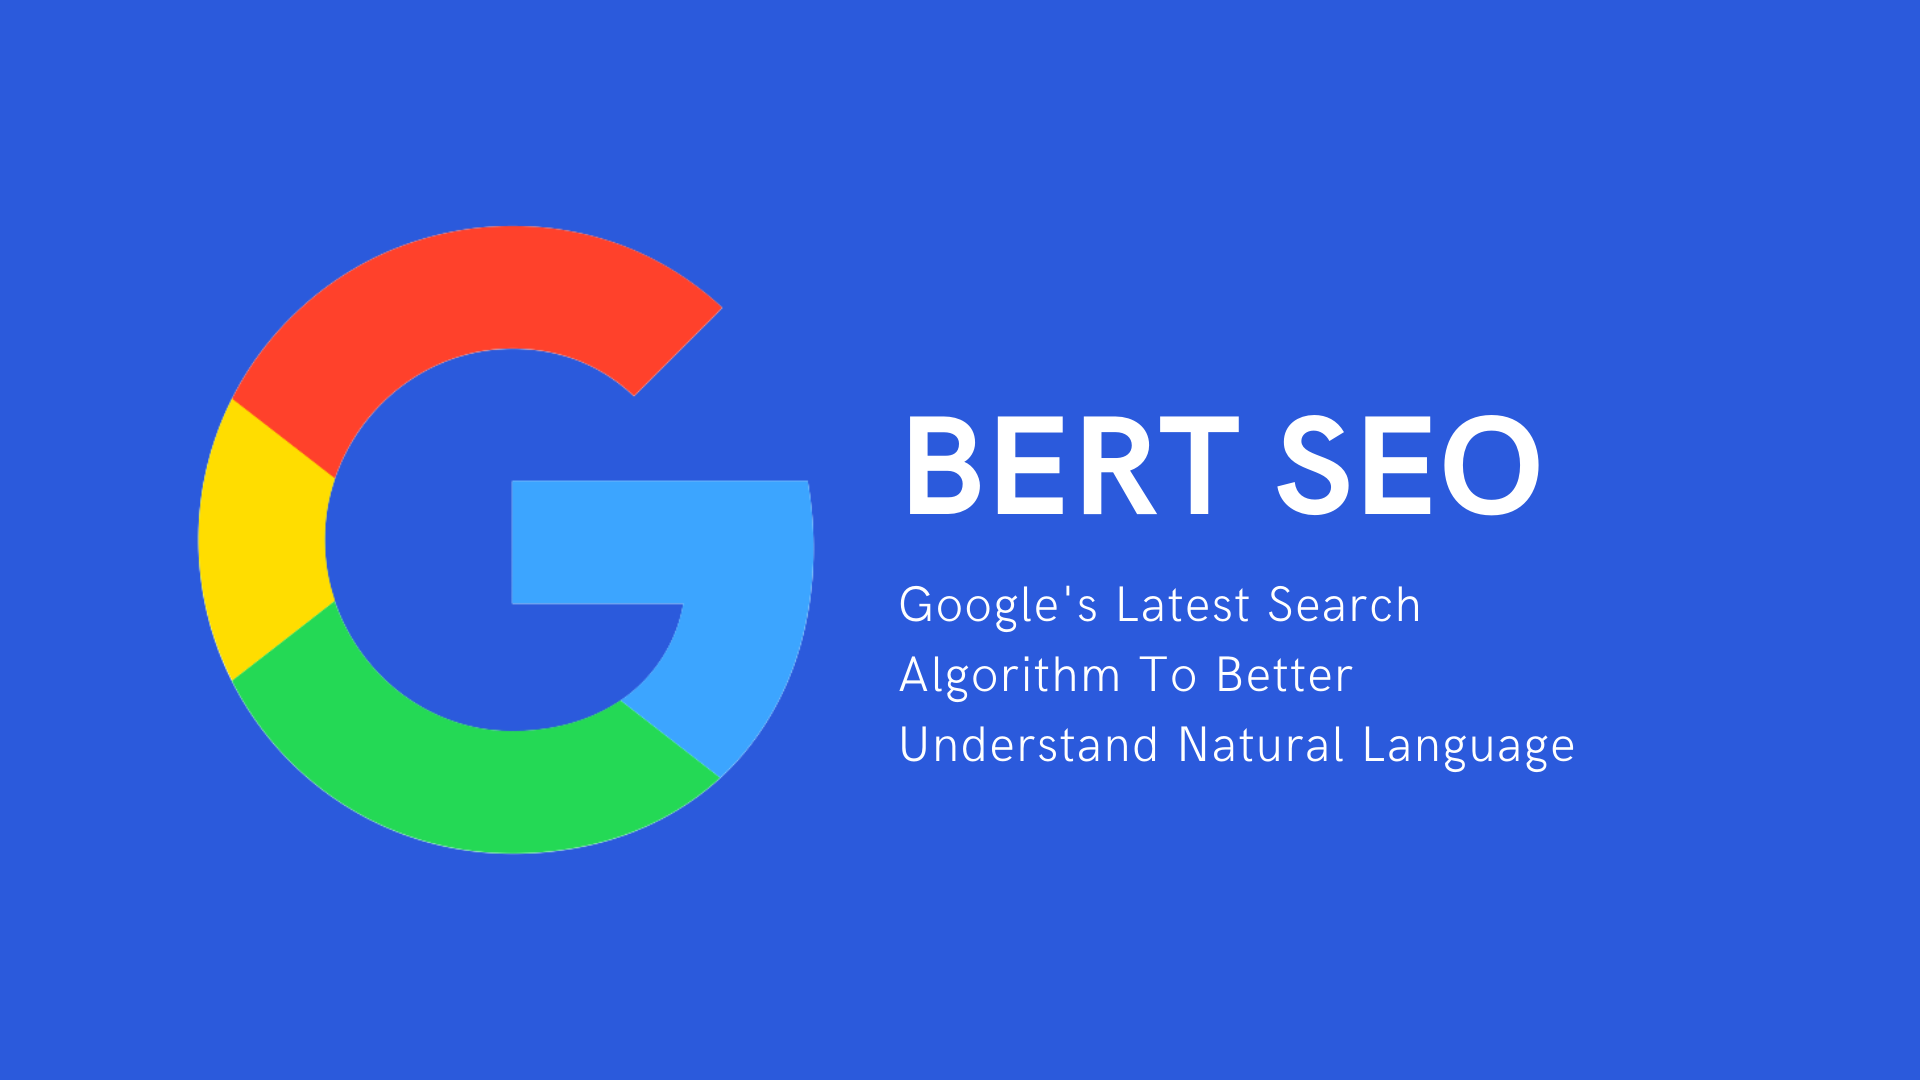 Featured image for BERT is here: Google’s latest search algorithm can better understand natural language